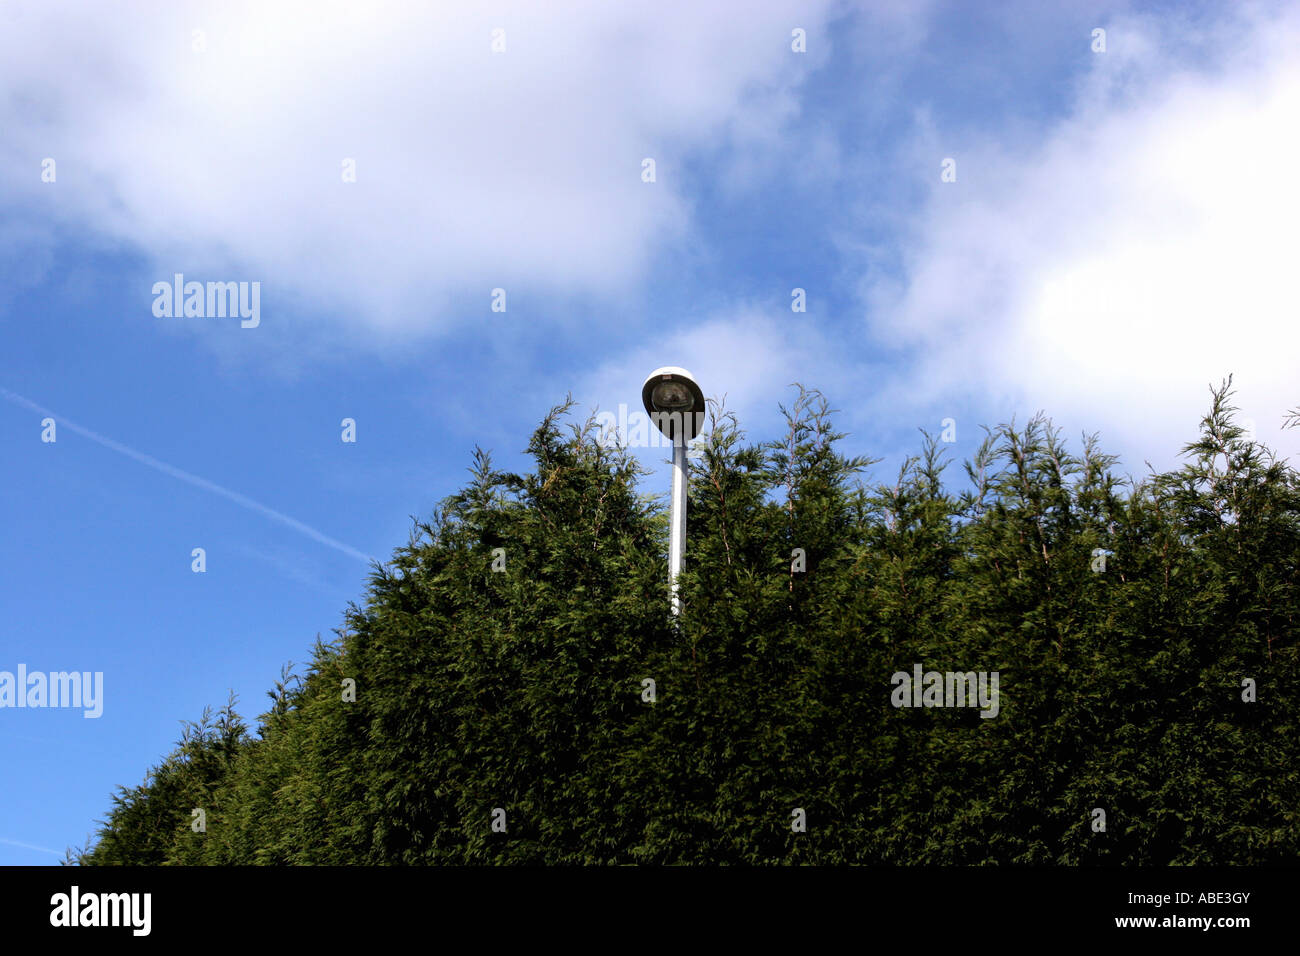 Streetlight surrounded by shrubbery Stock Photo